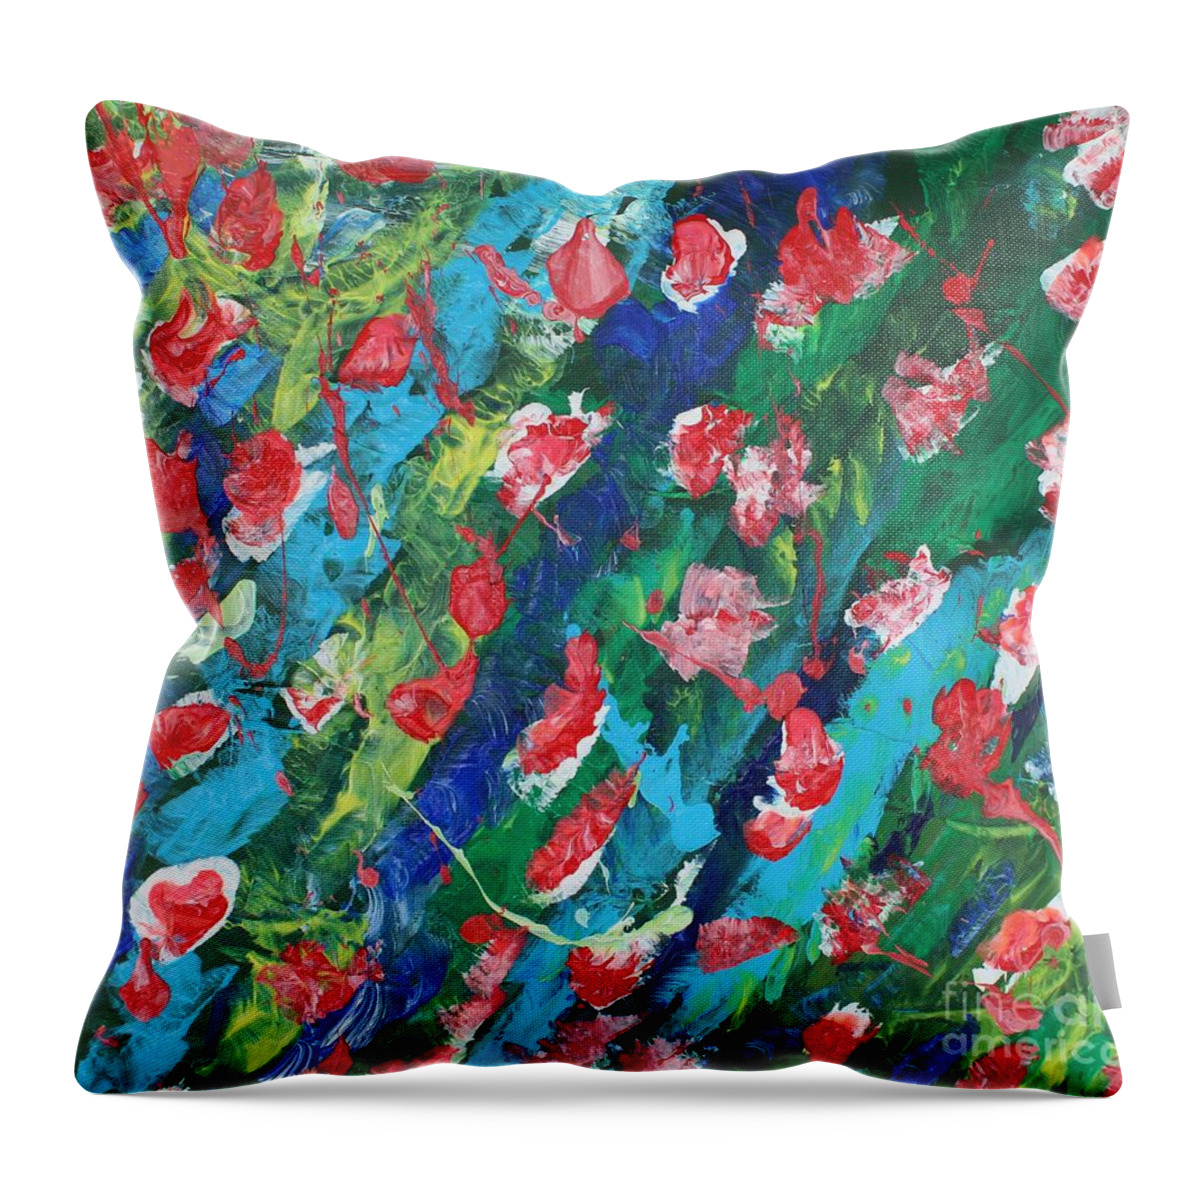 Flowers In The Sea   Bliss Contentment Delight Elation Enjoyment Euphoria Exhilaration Jubilation Laughter Optimism  Peace Of Mind Pleasure Prosperity Well-being Beatitude Blessedness Cheer Cheerfulness Content Throw Pillow featuring the painting Poppies by Sarahleah Hankes